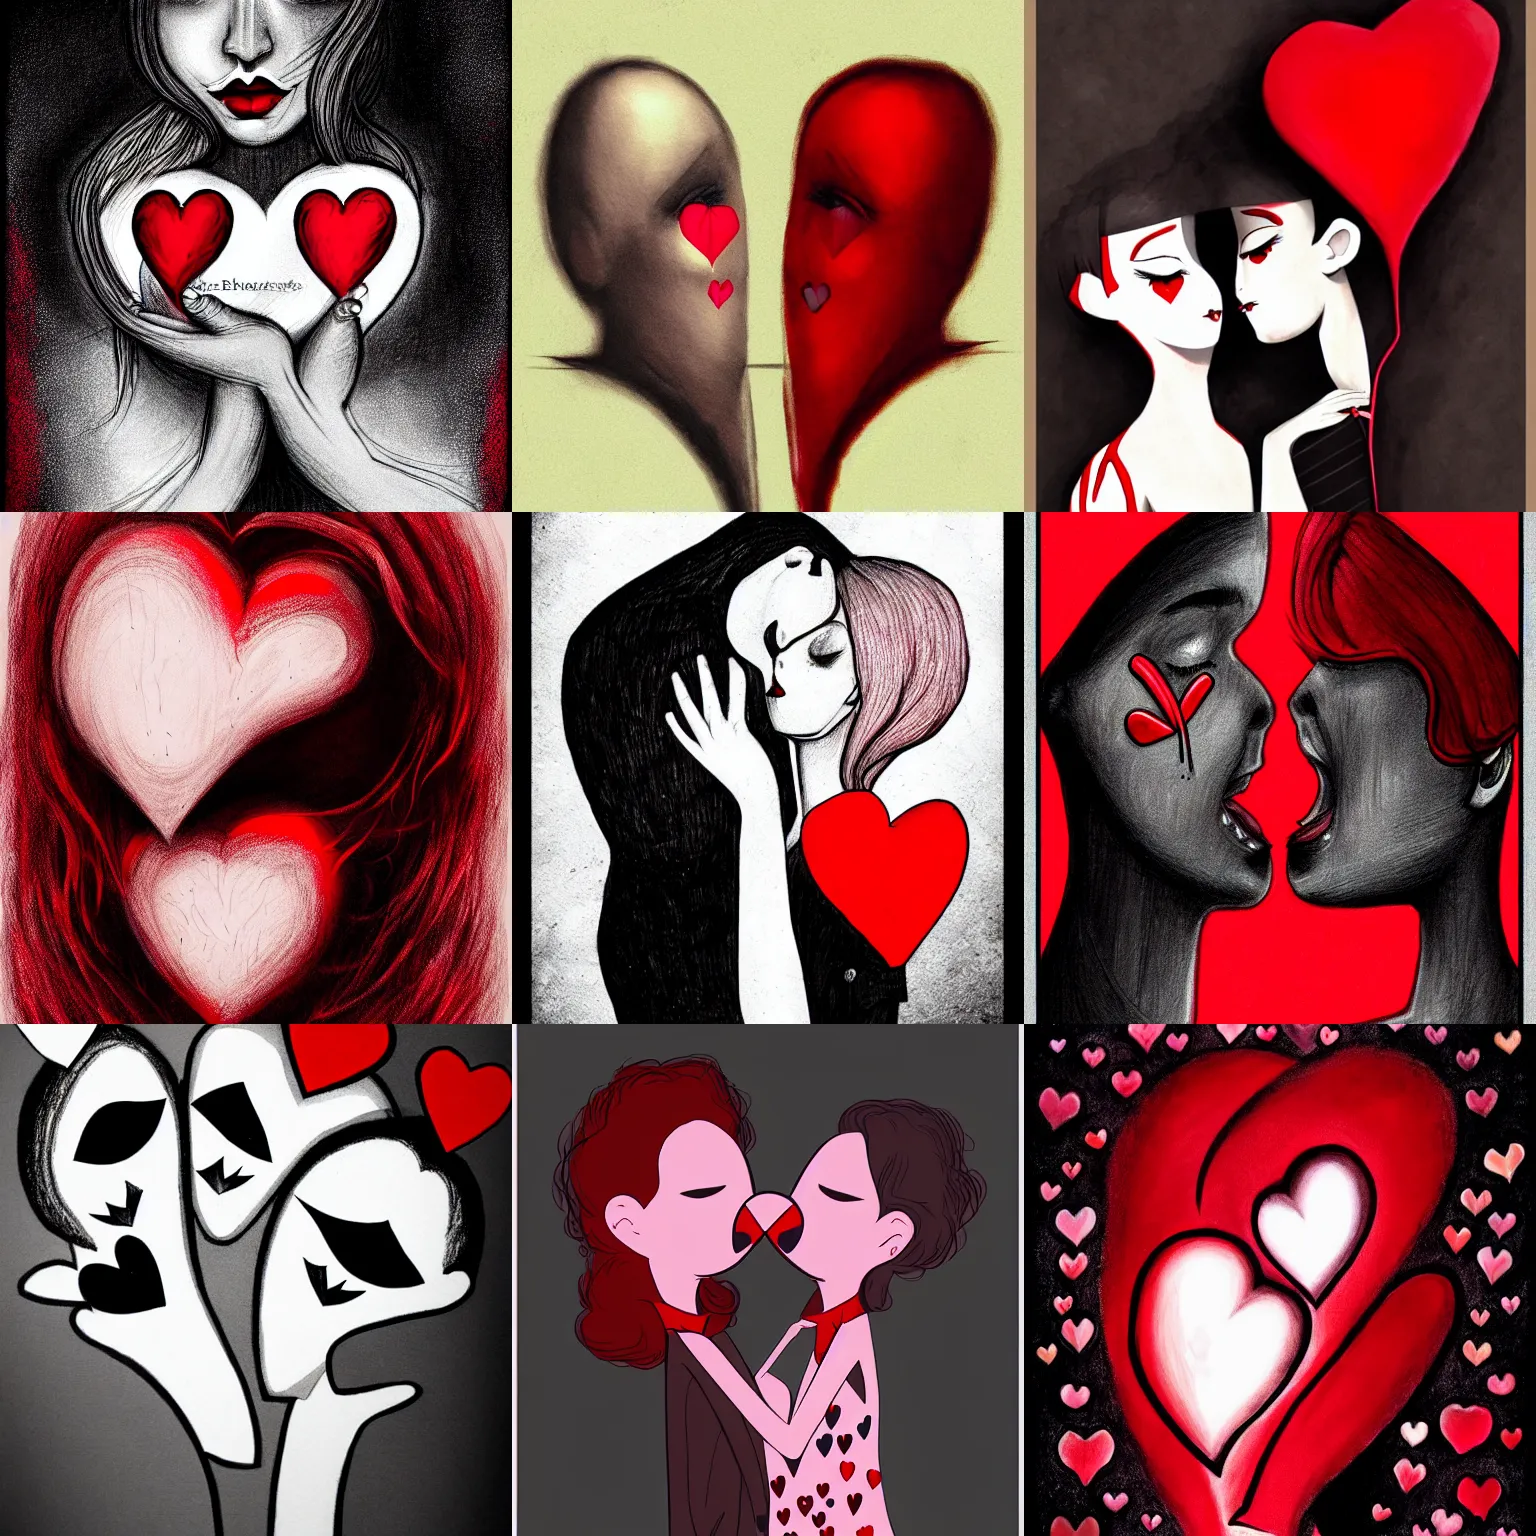 Prompt: french kiss, several hearts, love, sadness, dark ambiance, concept by Godfrey Blow, featured on deviantart, drawing, sots art, lyco art, artwork, photoillustration, poster art, black and red